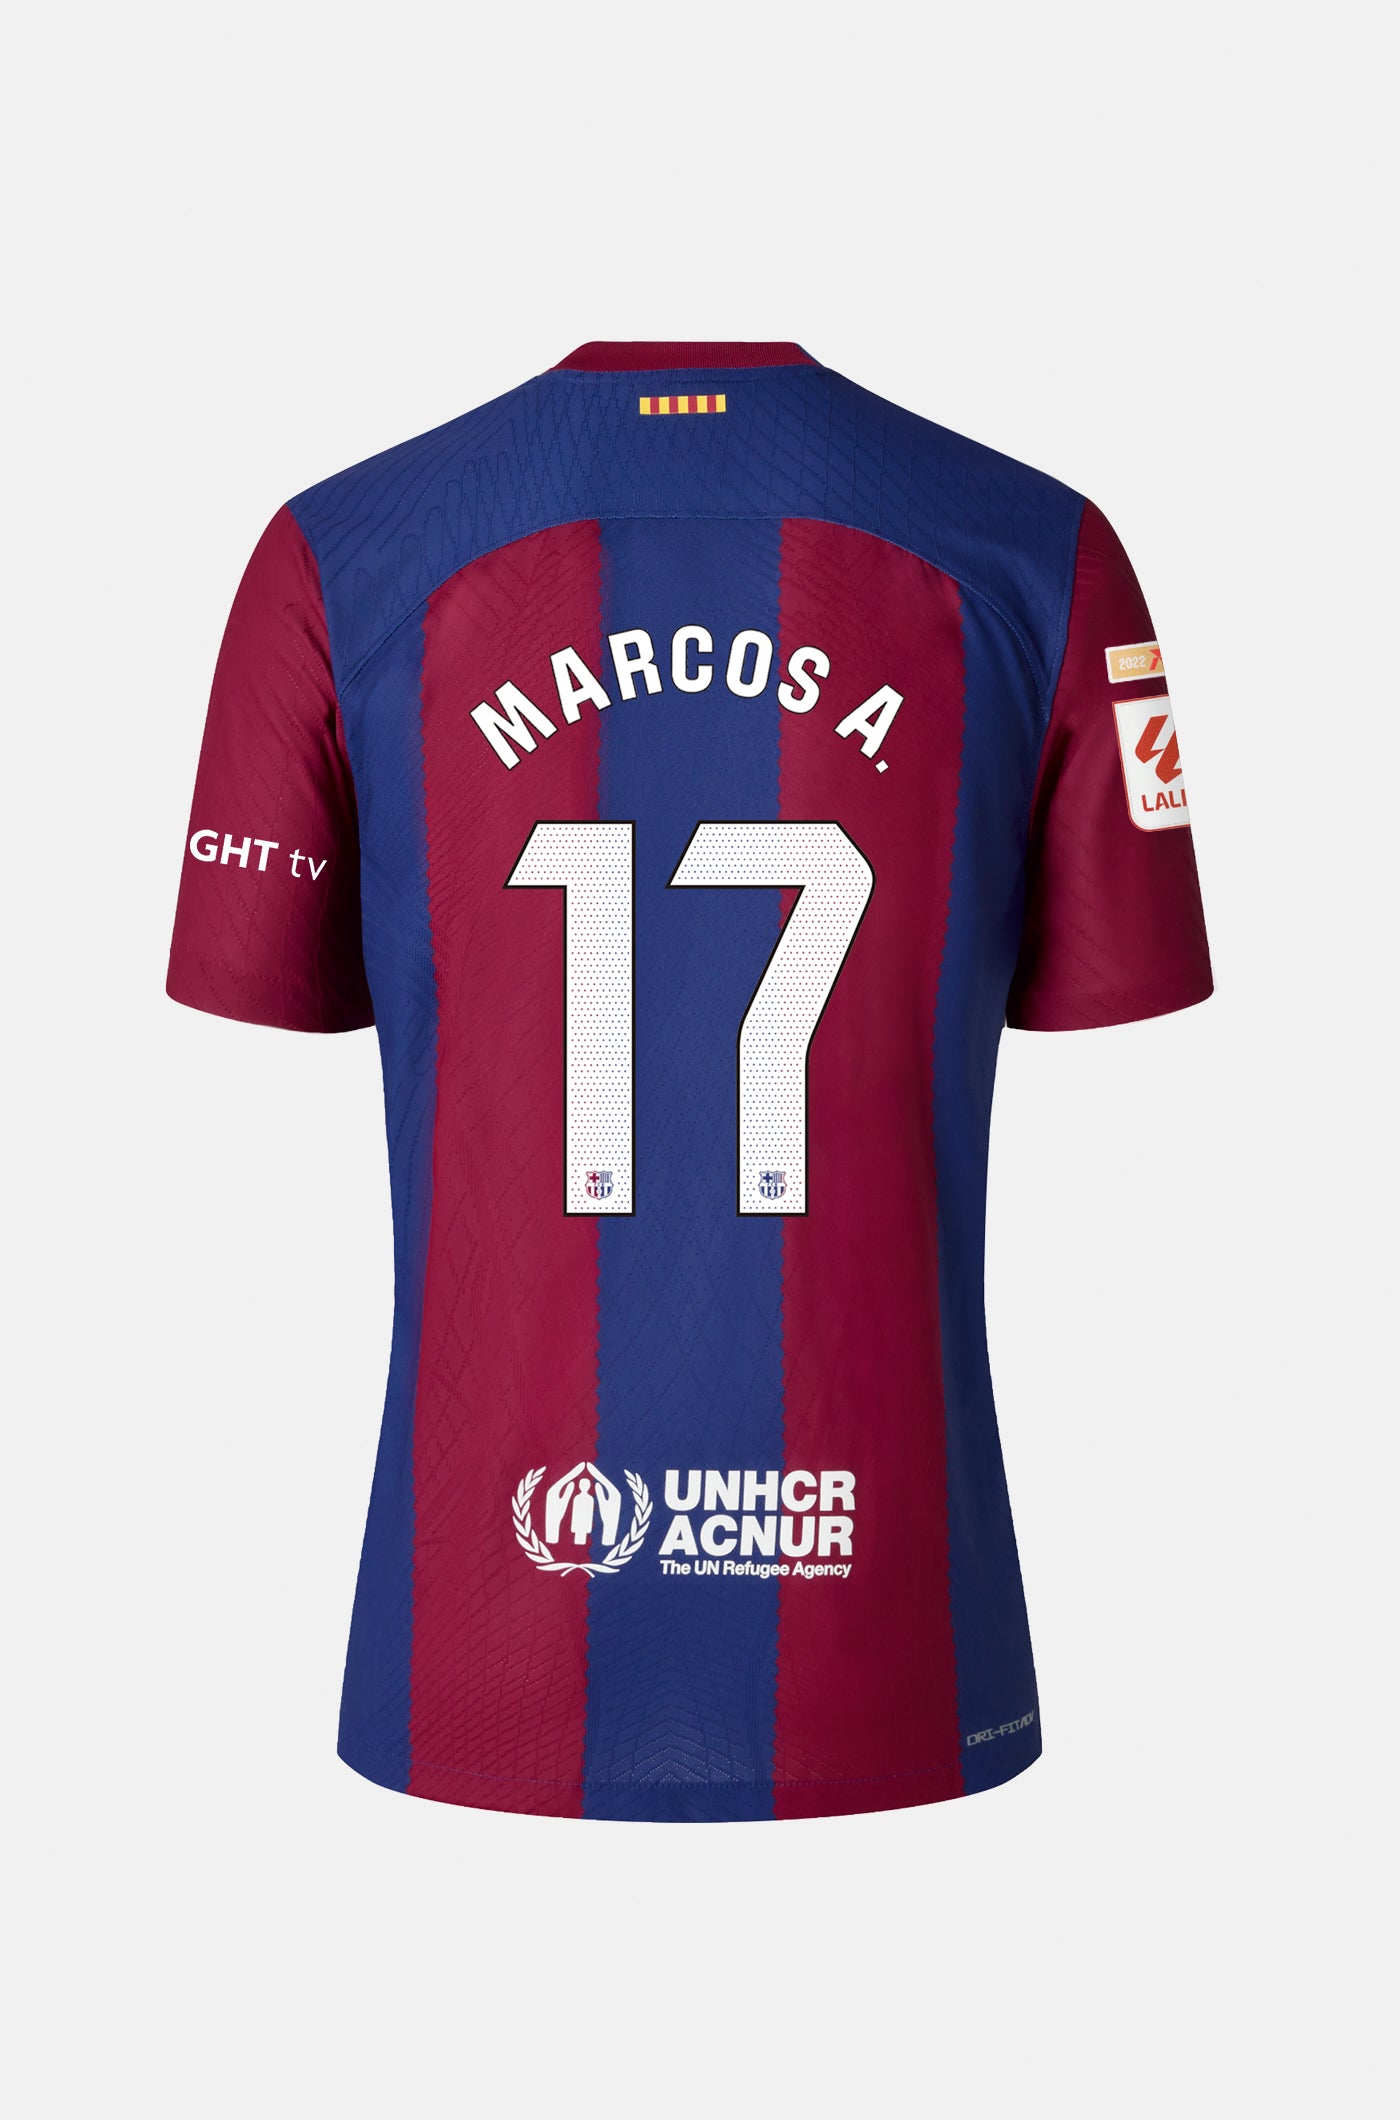 LFP FC Barcelona home shirt 23/24 Player's Edition - MARCOS A.